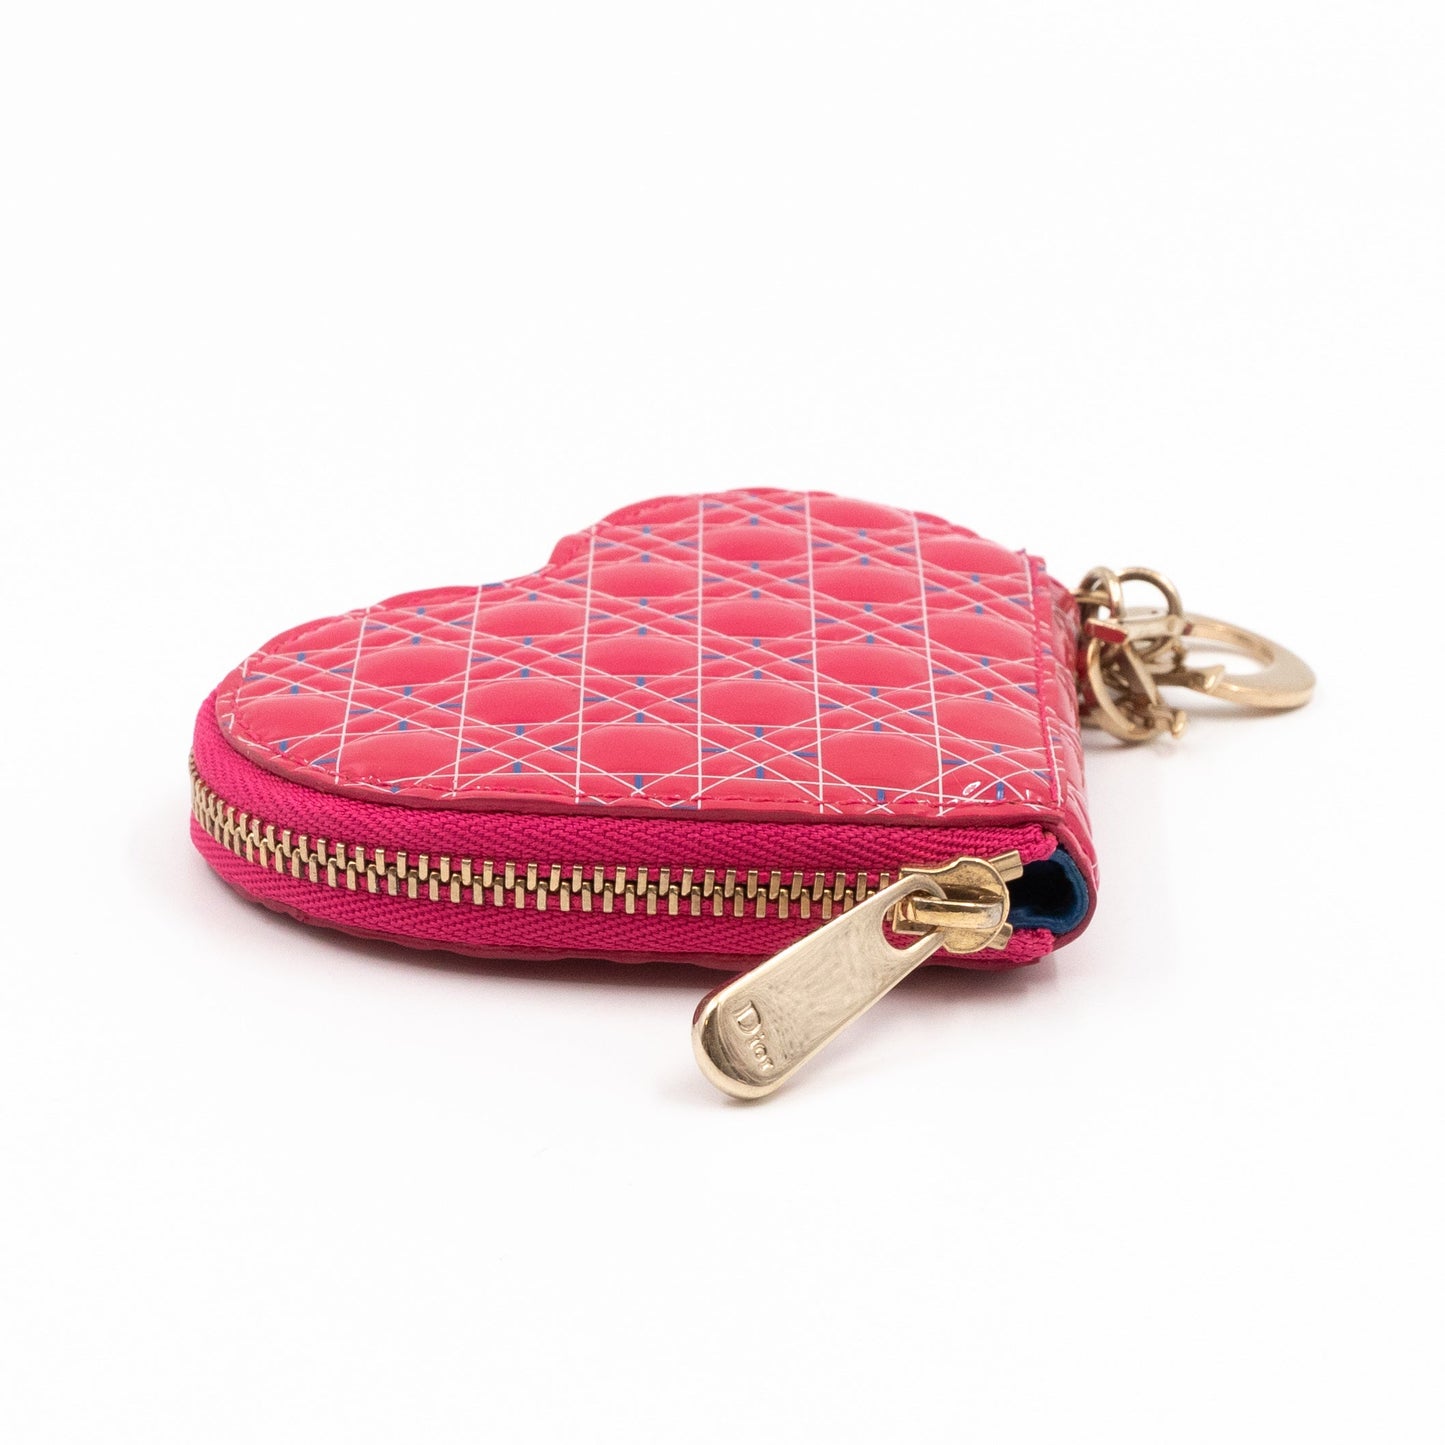 Heart Coin Purse Pink Patent